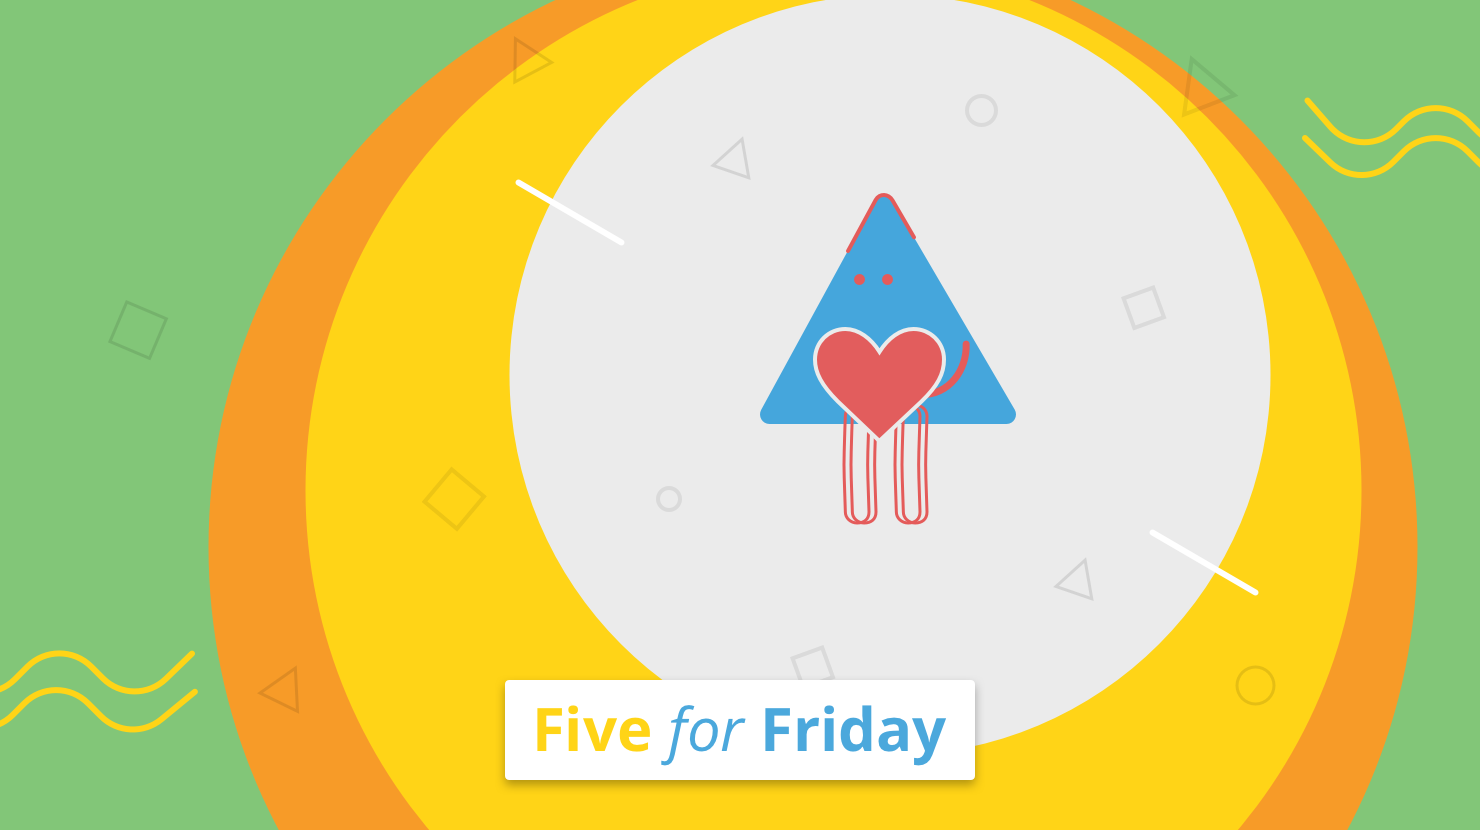 Five for Friday: Passion for work